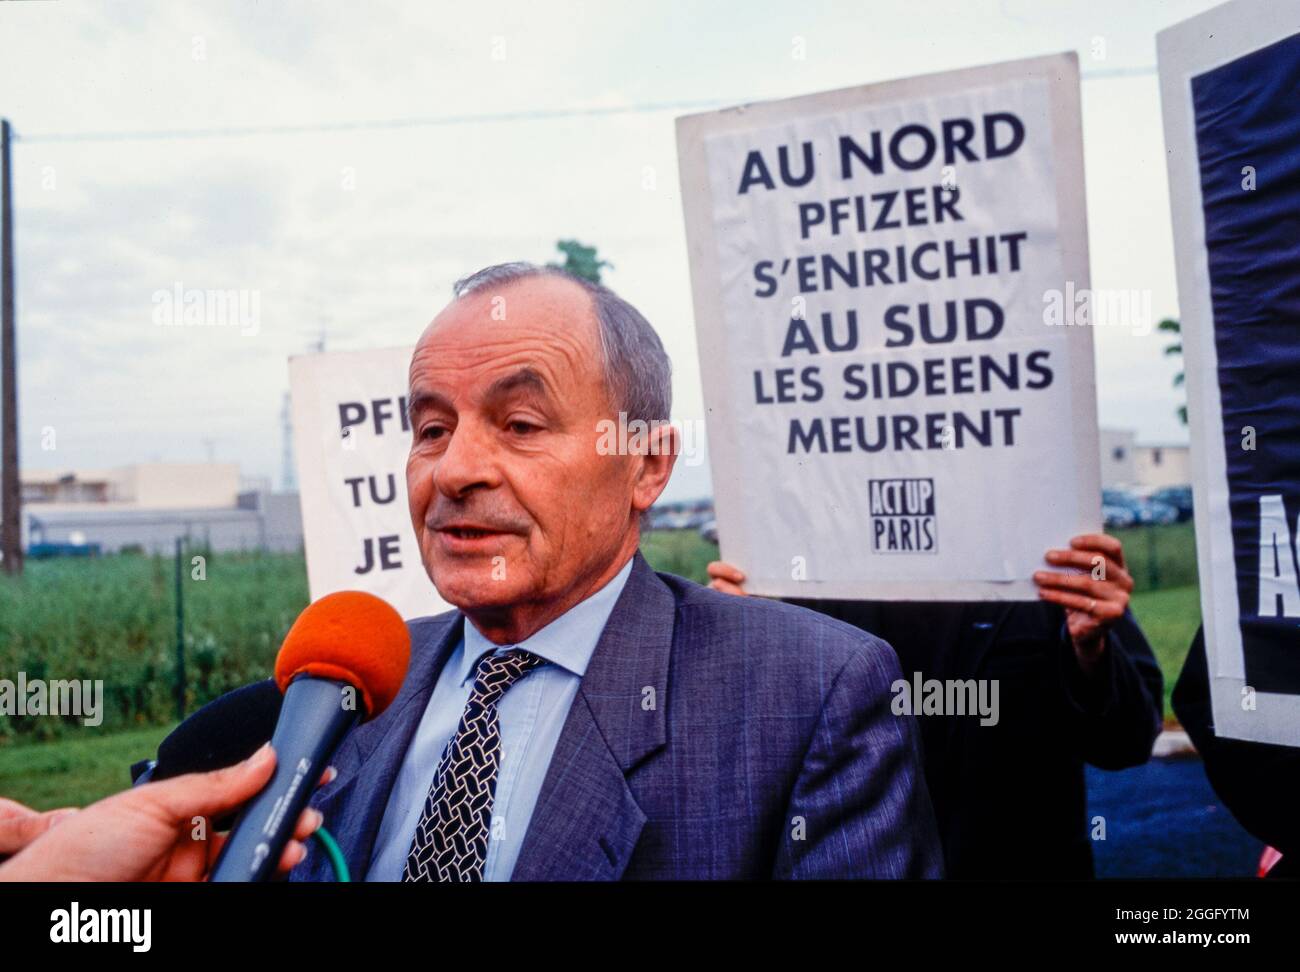 Act Up Paris Demonstration Against Pfizer Pharmaceuticals Company,  AIDS Activists Block Factory Entrance, TV Interview with Factory Manager, pharma industry, Protest against Access to Generic medication decisions Stock Photo